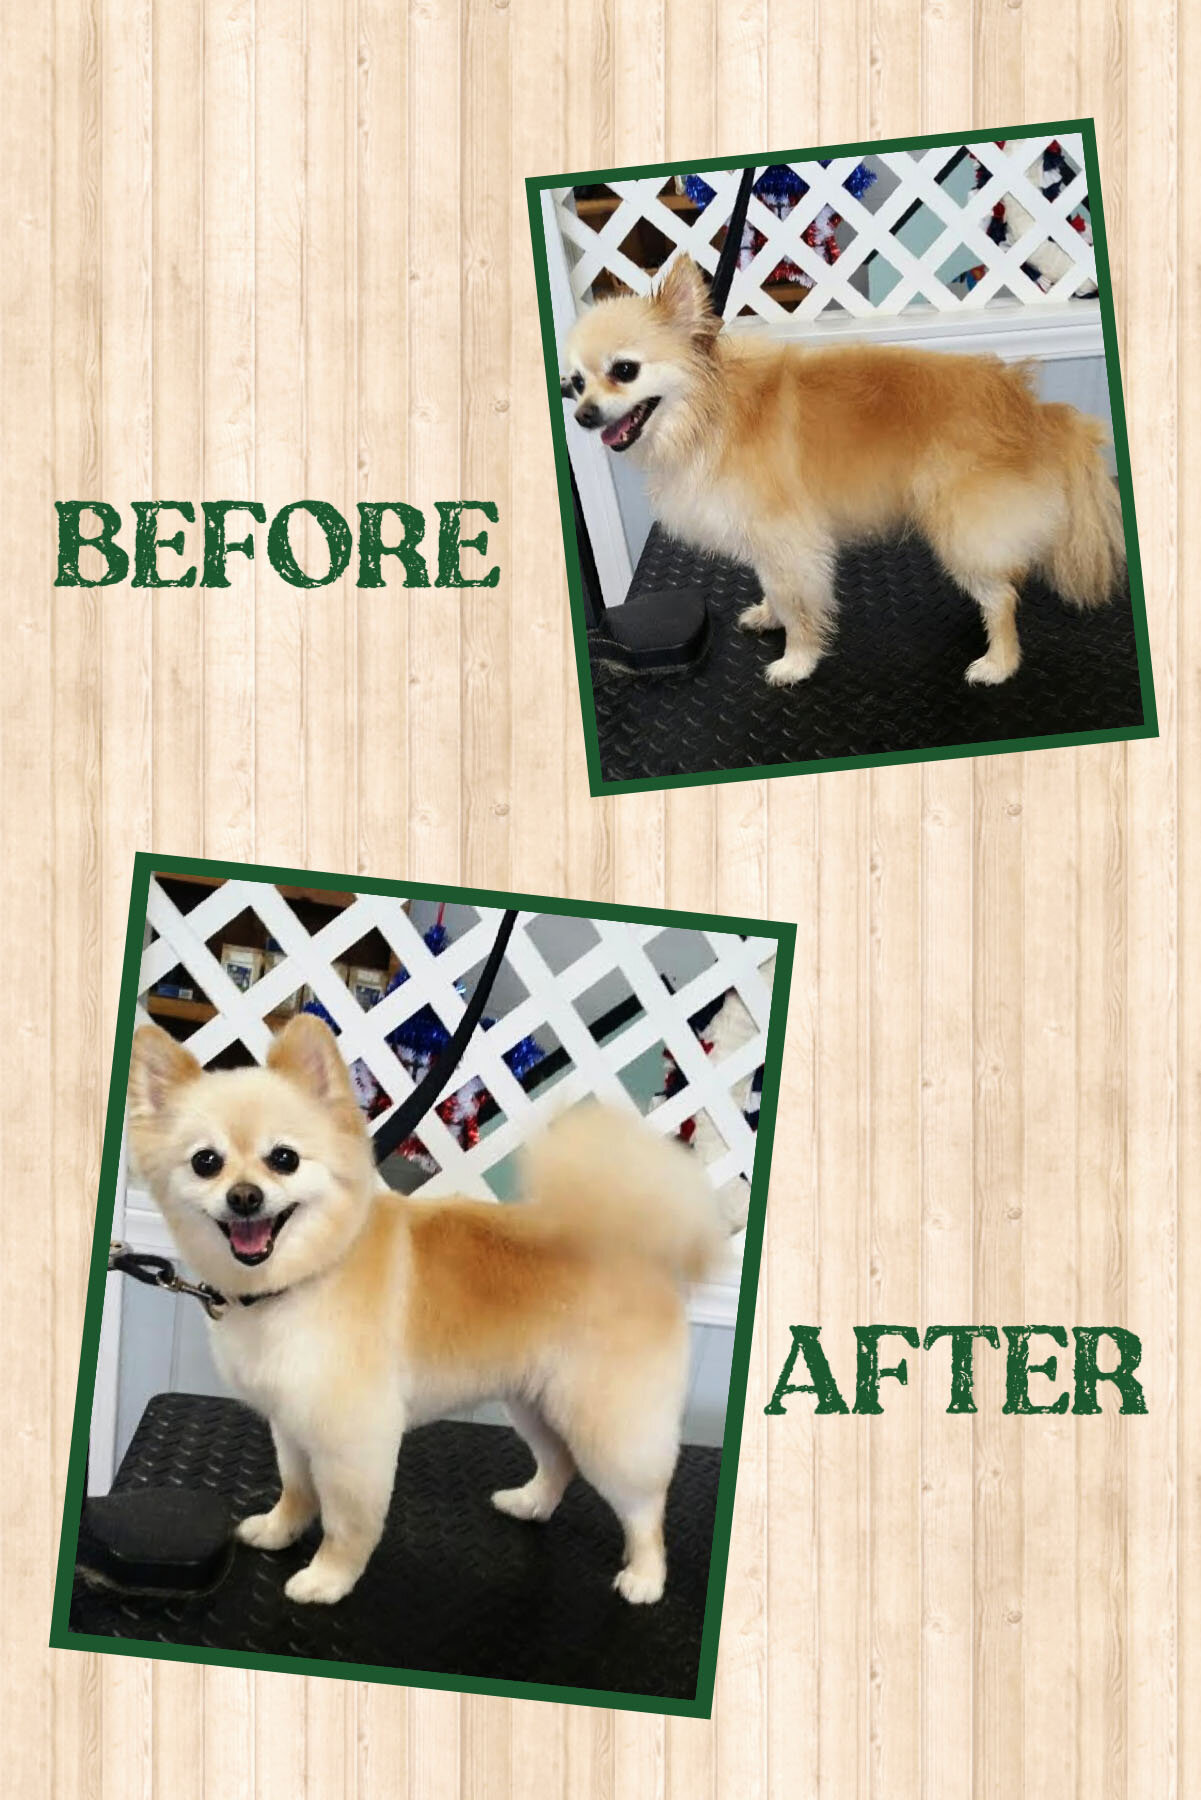 Zoey's before and after photos